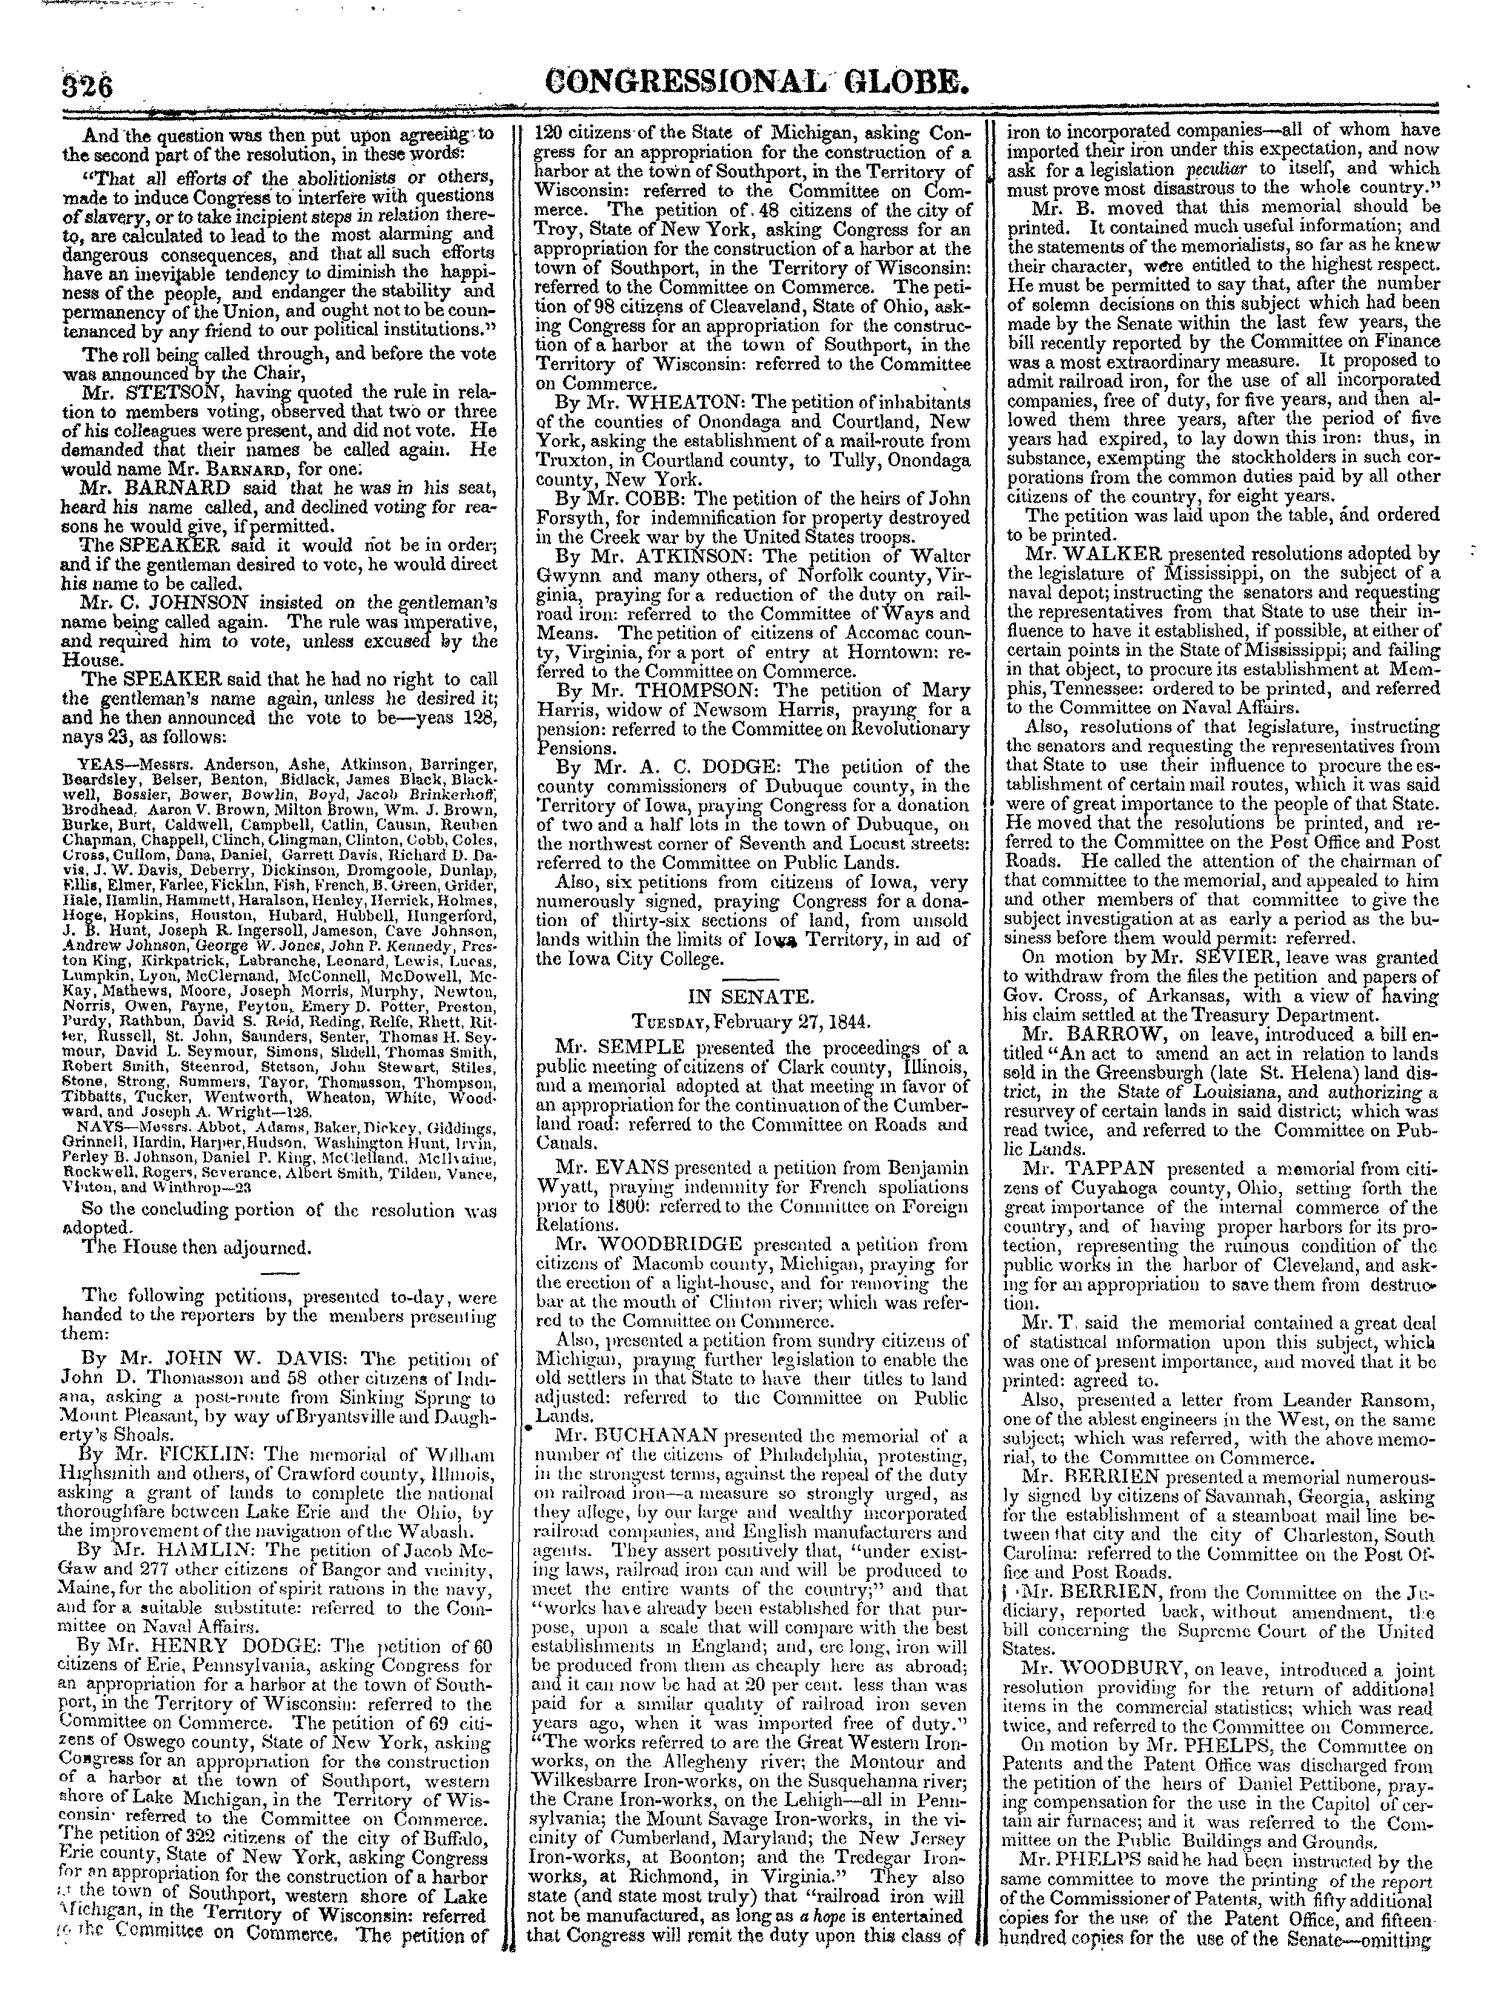 The Congressional Globe, Volume 13, Part 1: Twenty-Eighth Congress, First Session
                                                
                                                    326
                                                